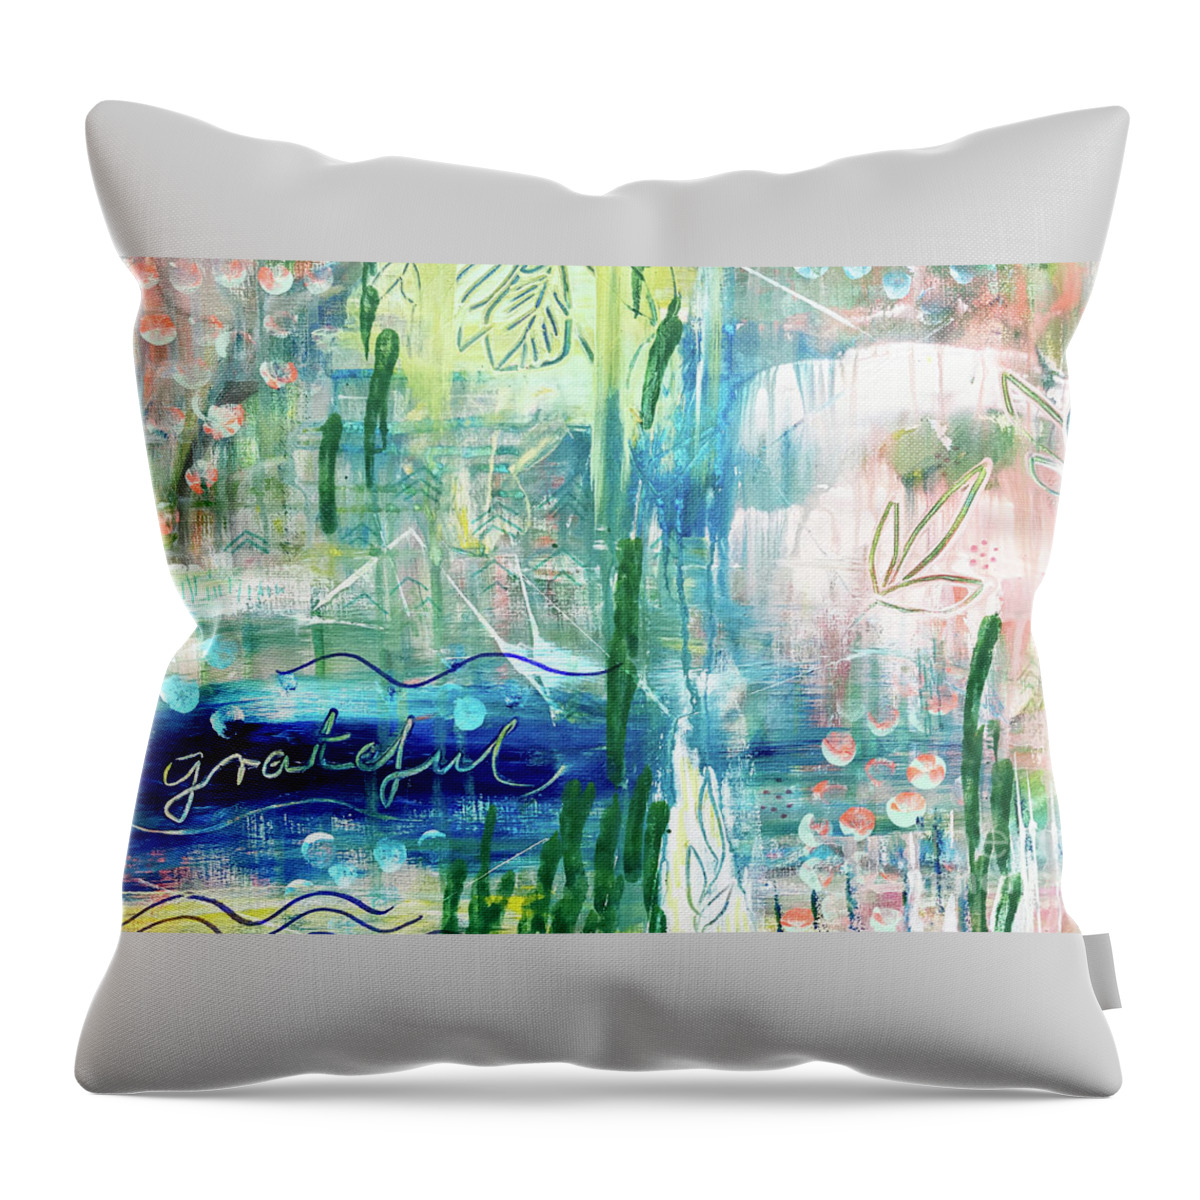 Grateful Throw Pillow featuring the painting Grateful by Claudia Schoen